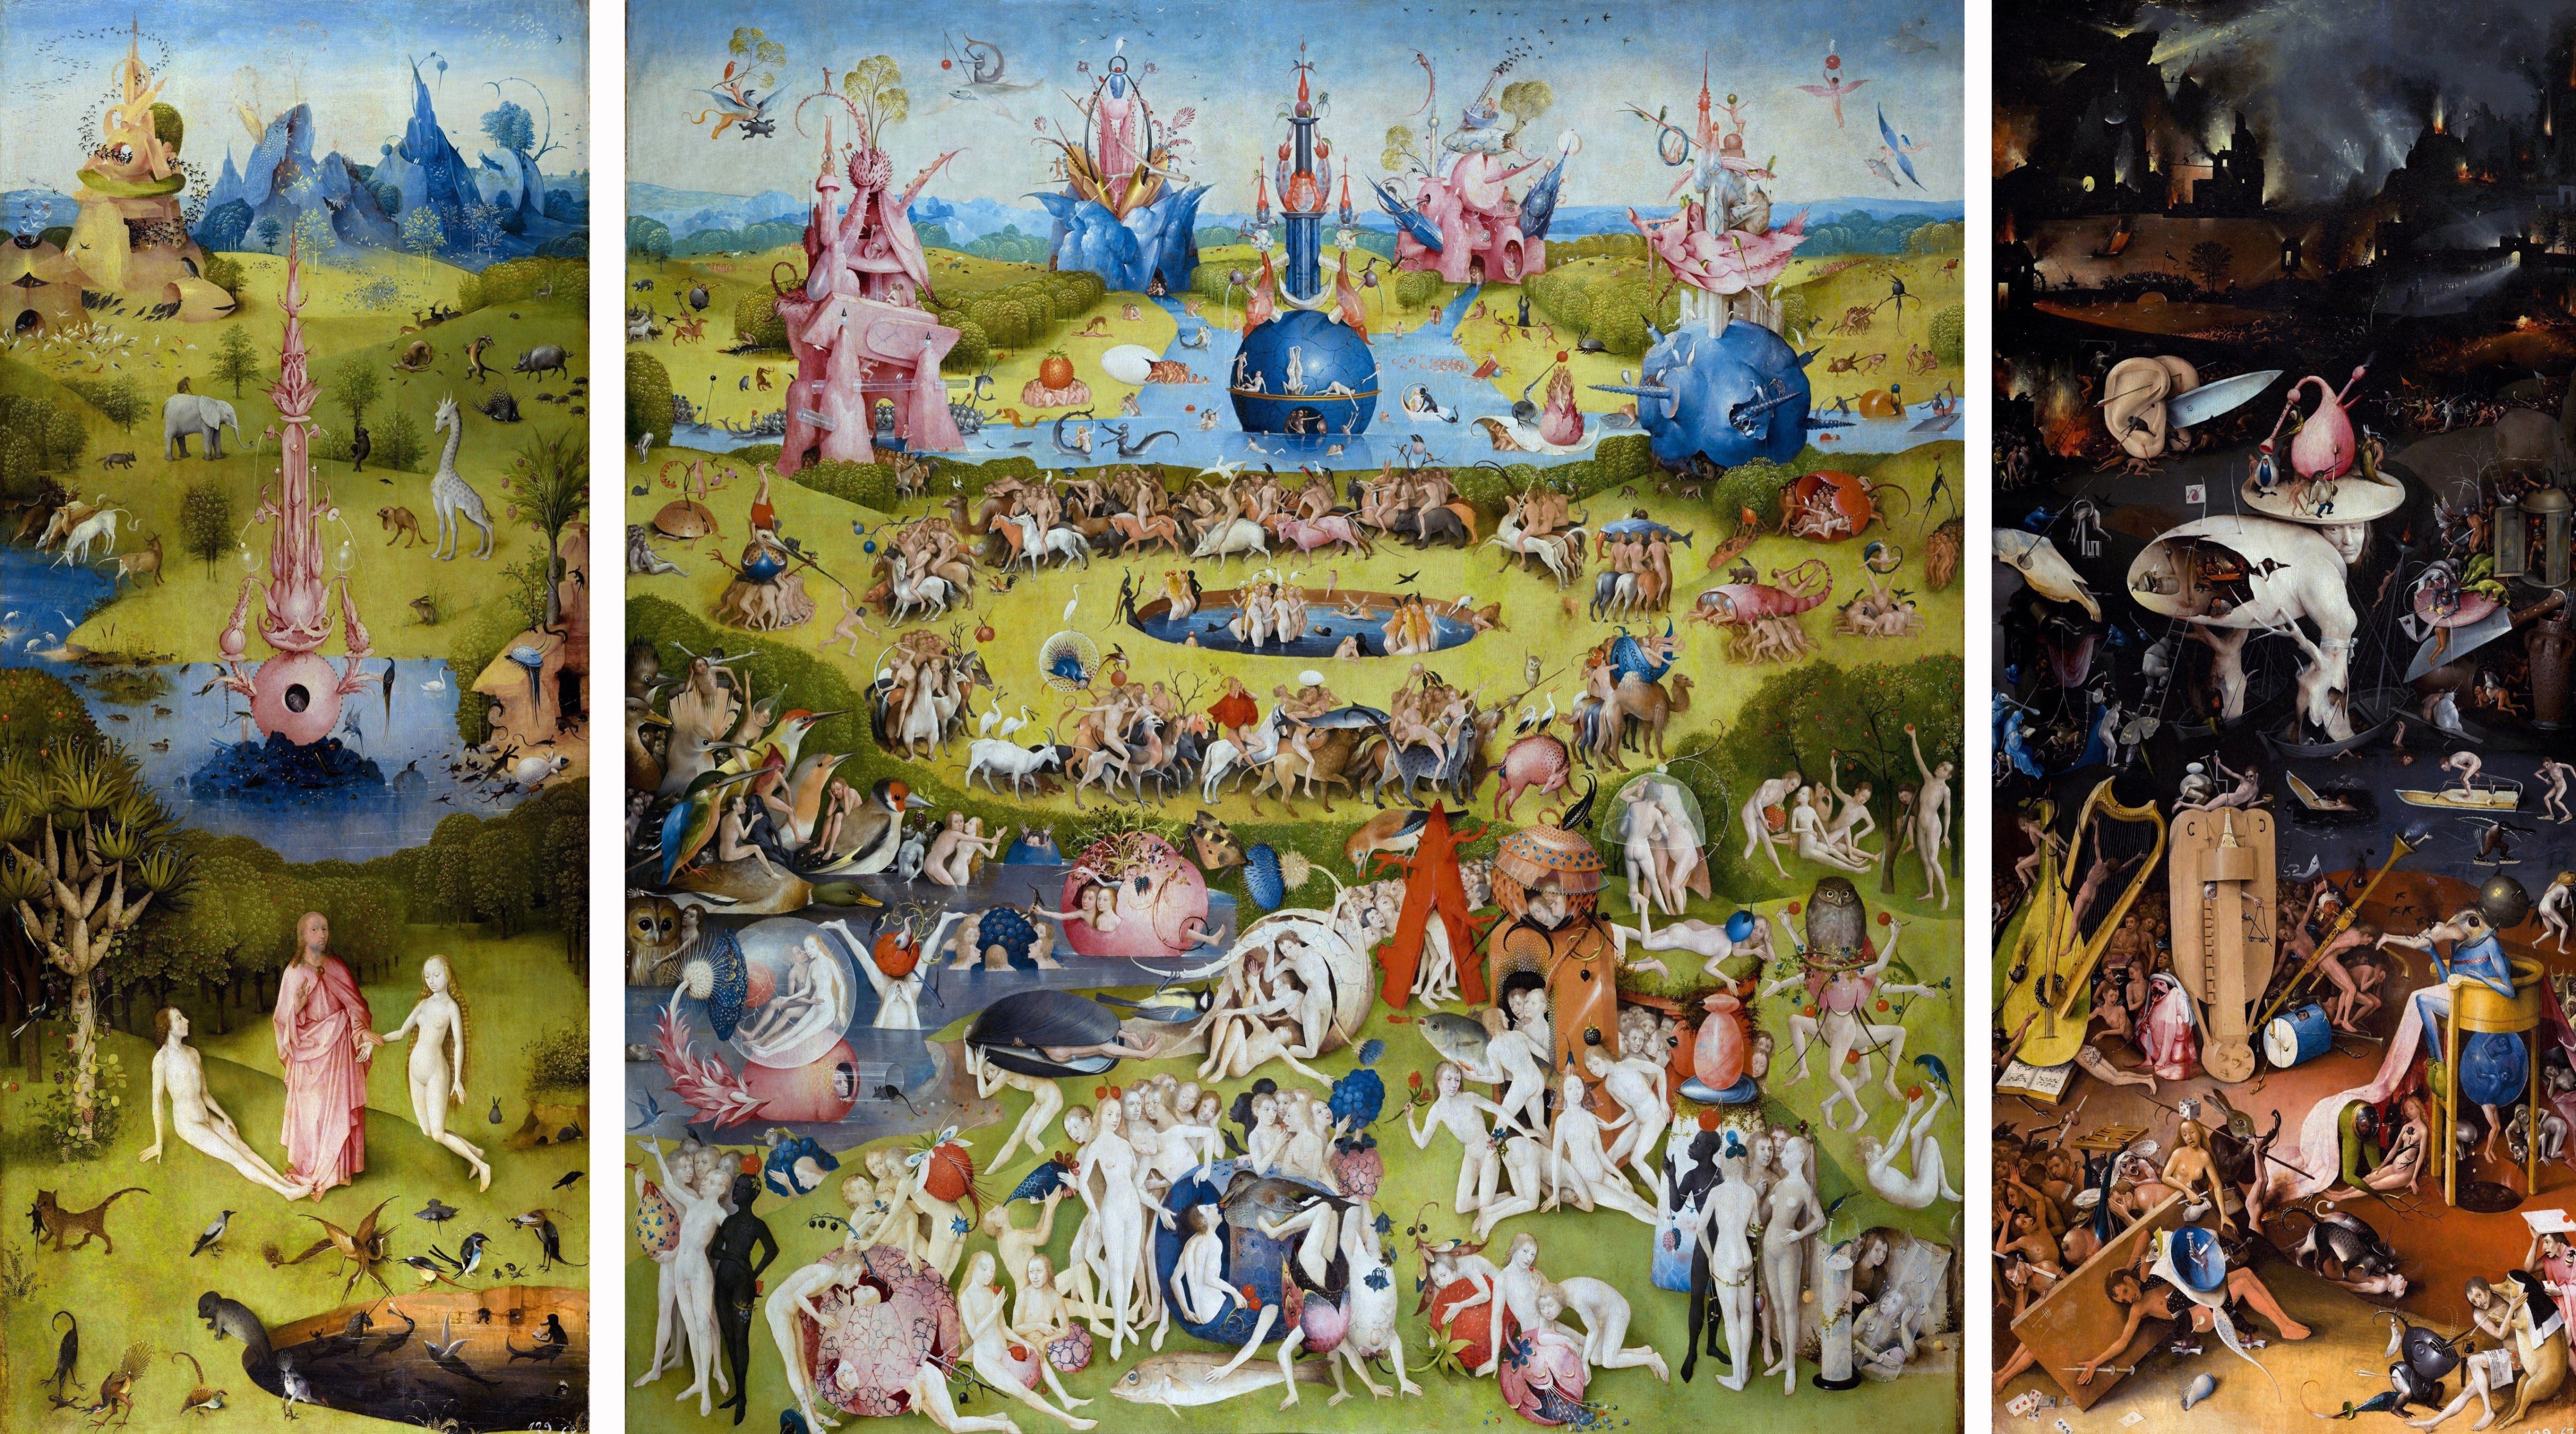 Painting titled 'The Garden of Earthly Delights' the modern title given to a triptych painted by the Early Netherlandish master Hieronymus Bosch (1450-1516). Dated 15th Century. (Photo by: Universal History Archive/UIG via Getty Images) (Universal History Archive, via Getty Images)